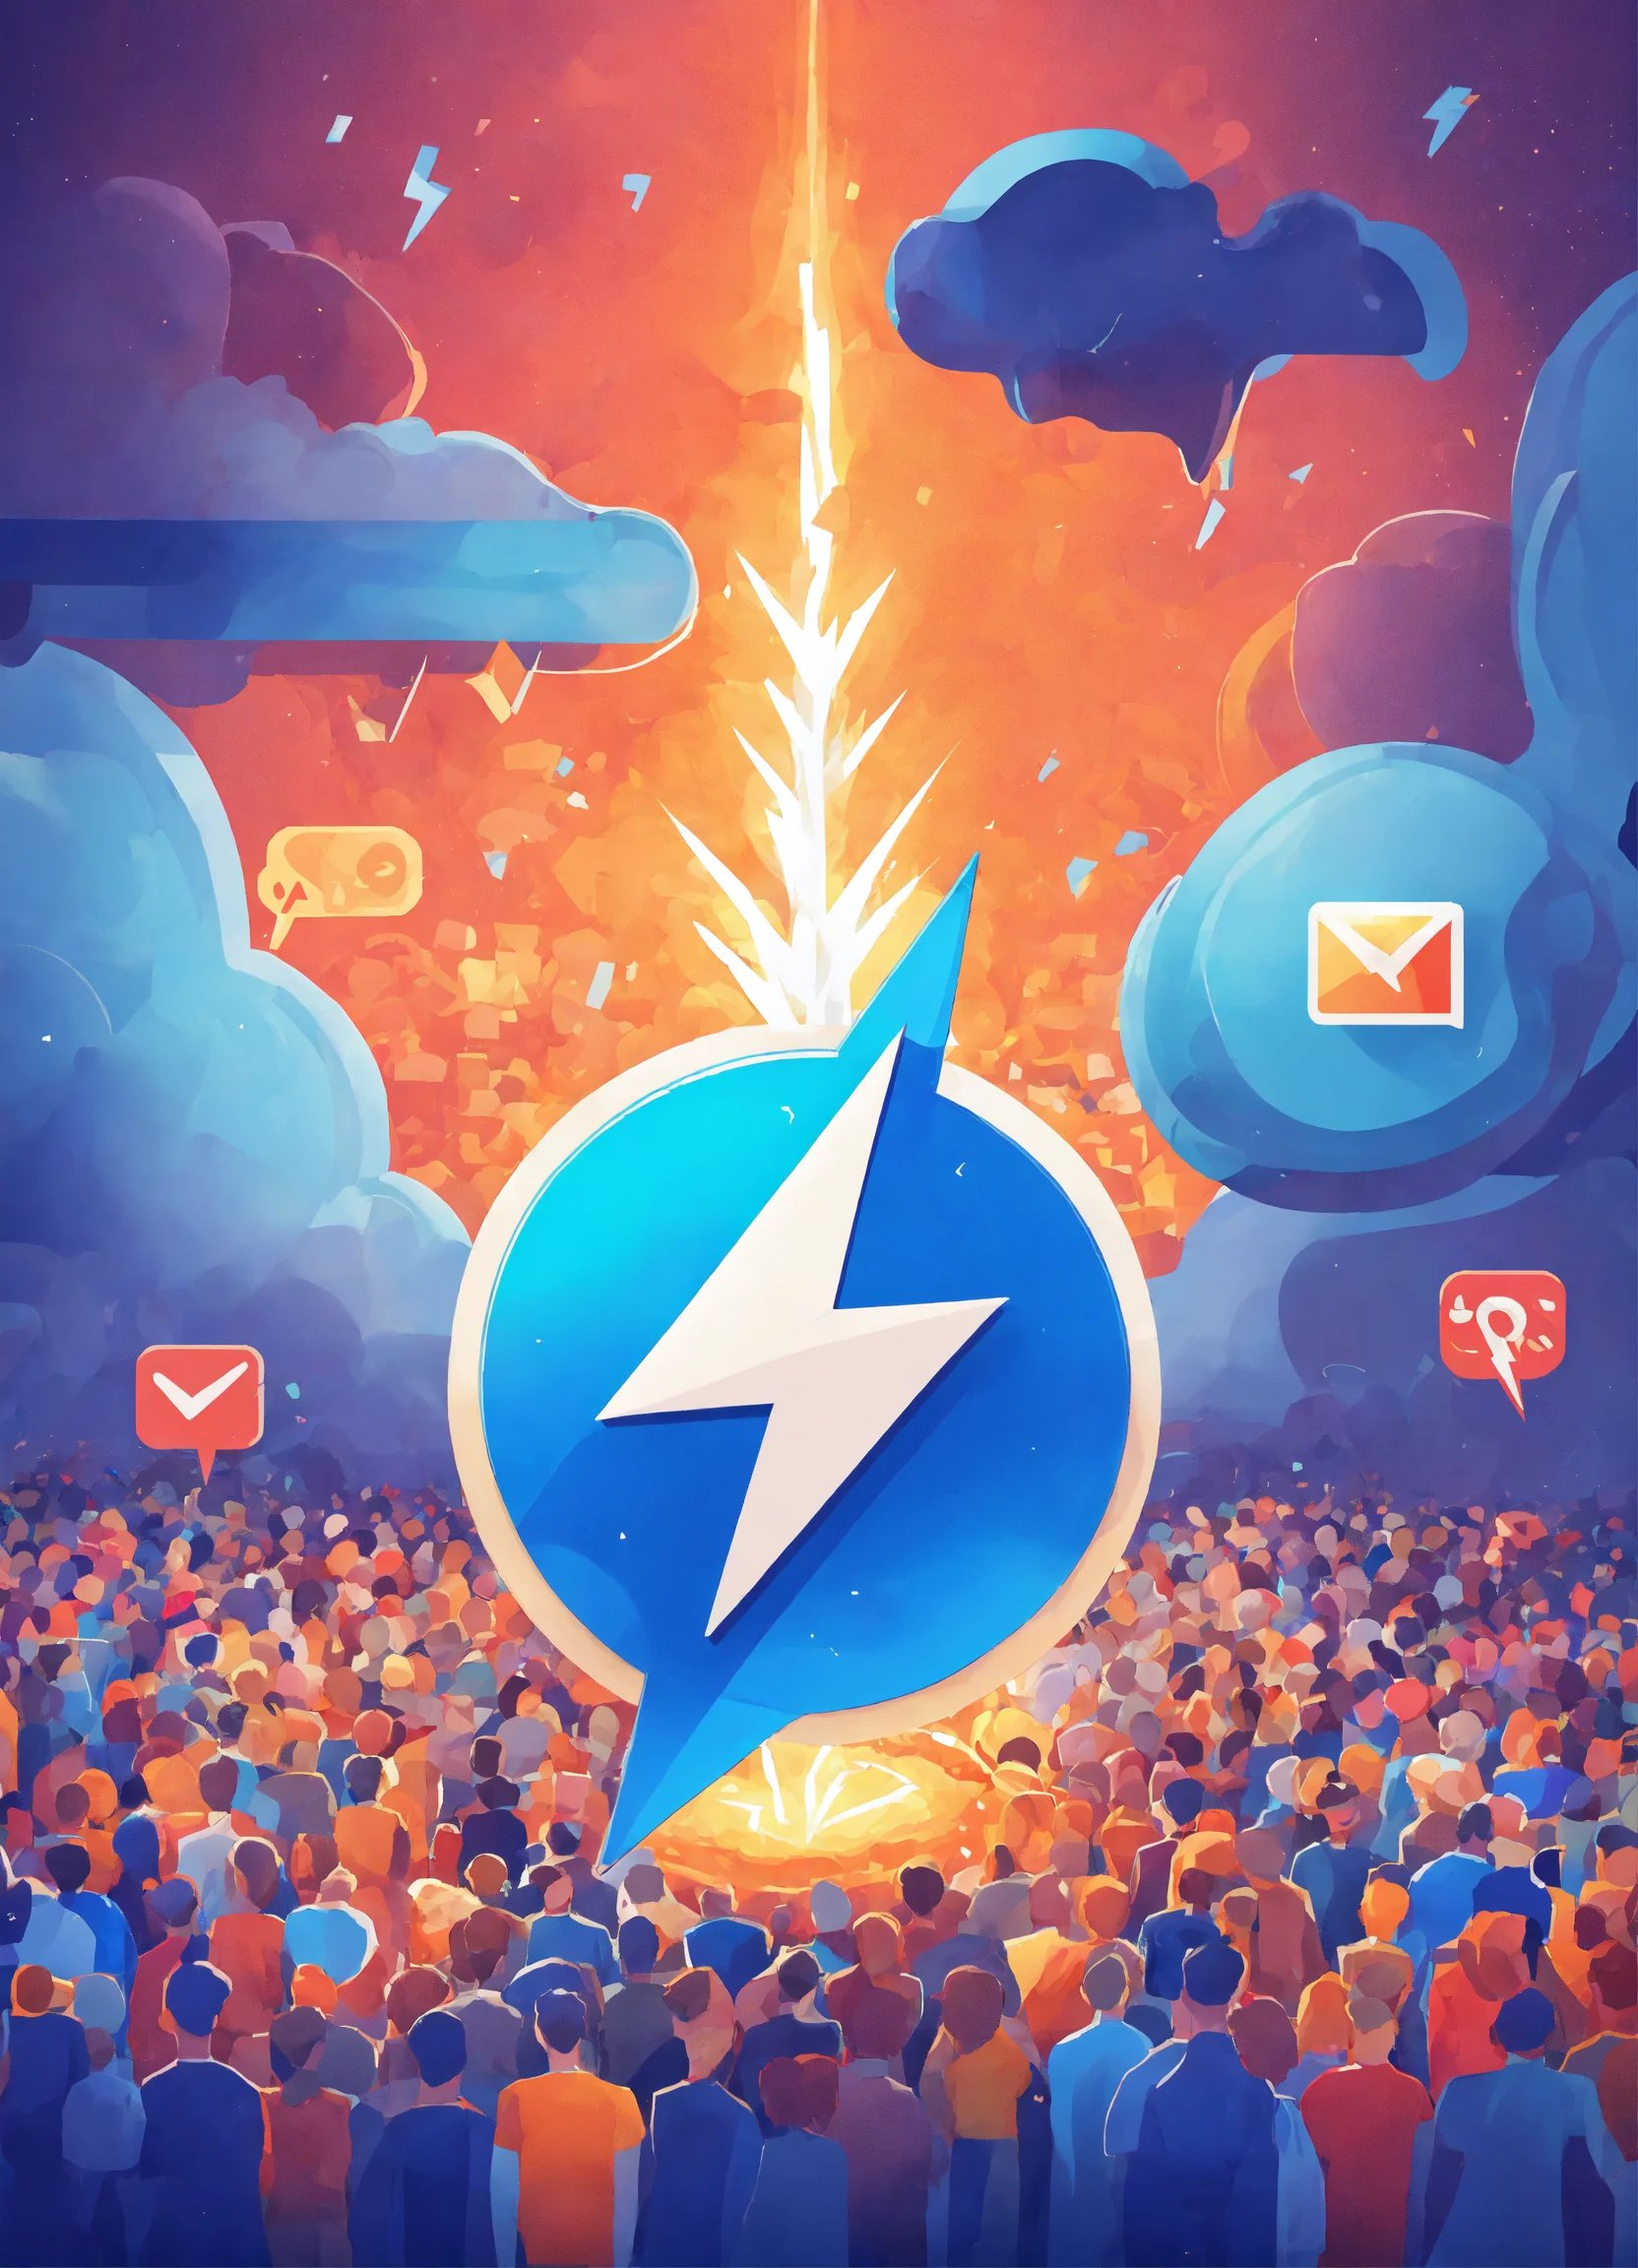 🔵Telegram channel with 1000 followers🔵